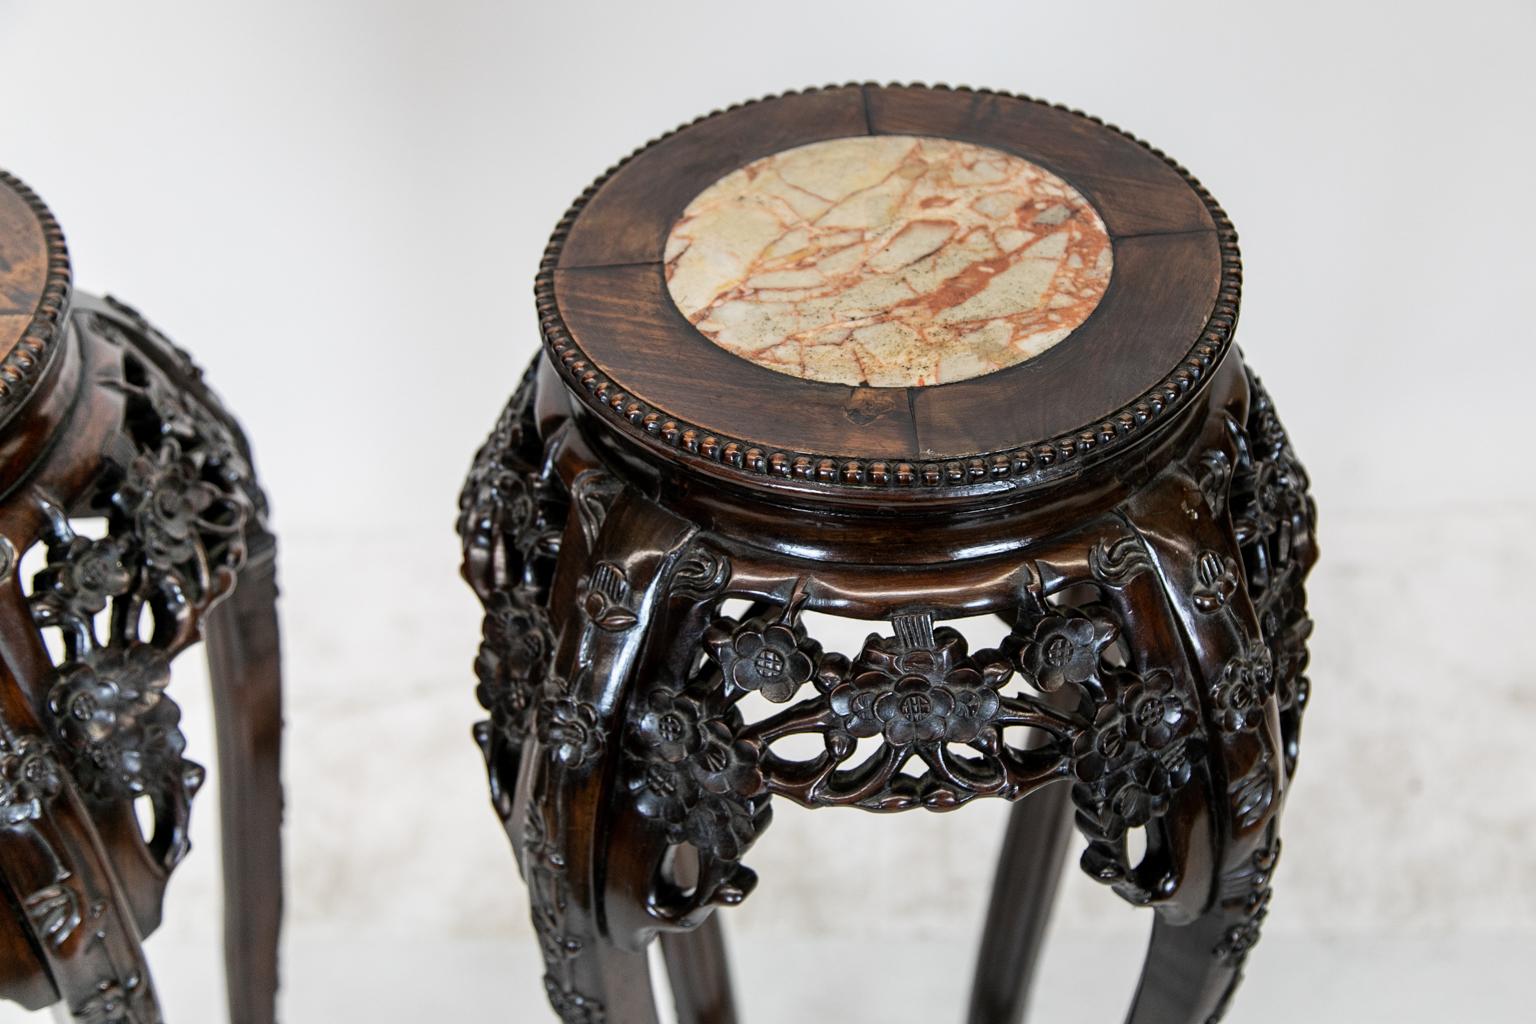 Pair of Chinese rosewood stands, very rarely found as a matched pair. These have marble insets in soft beige earth tones. The aprons have carved reticulated floral motifs with a beadwork border on top. There is quarter panel banding around the